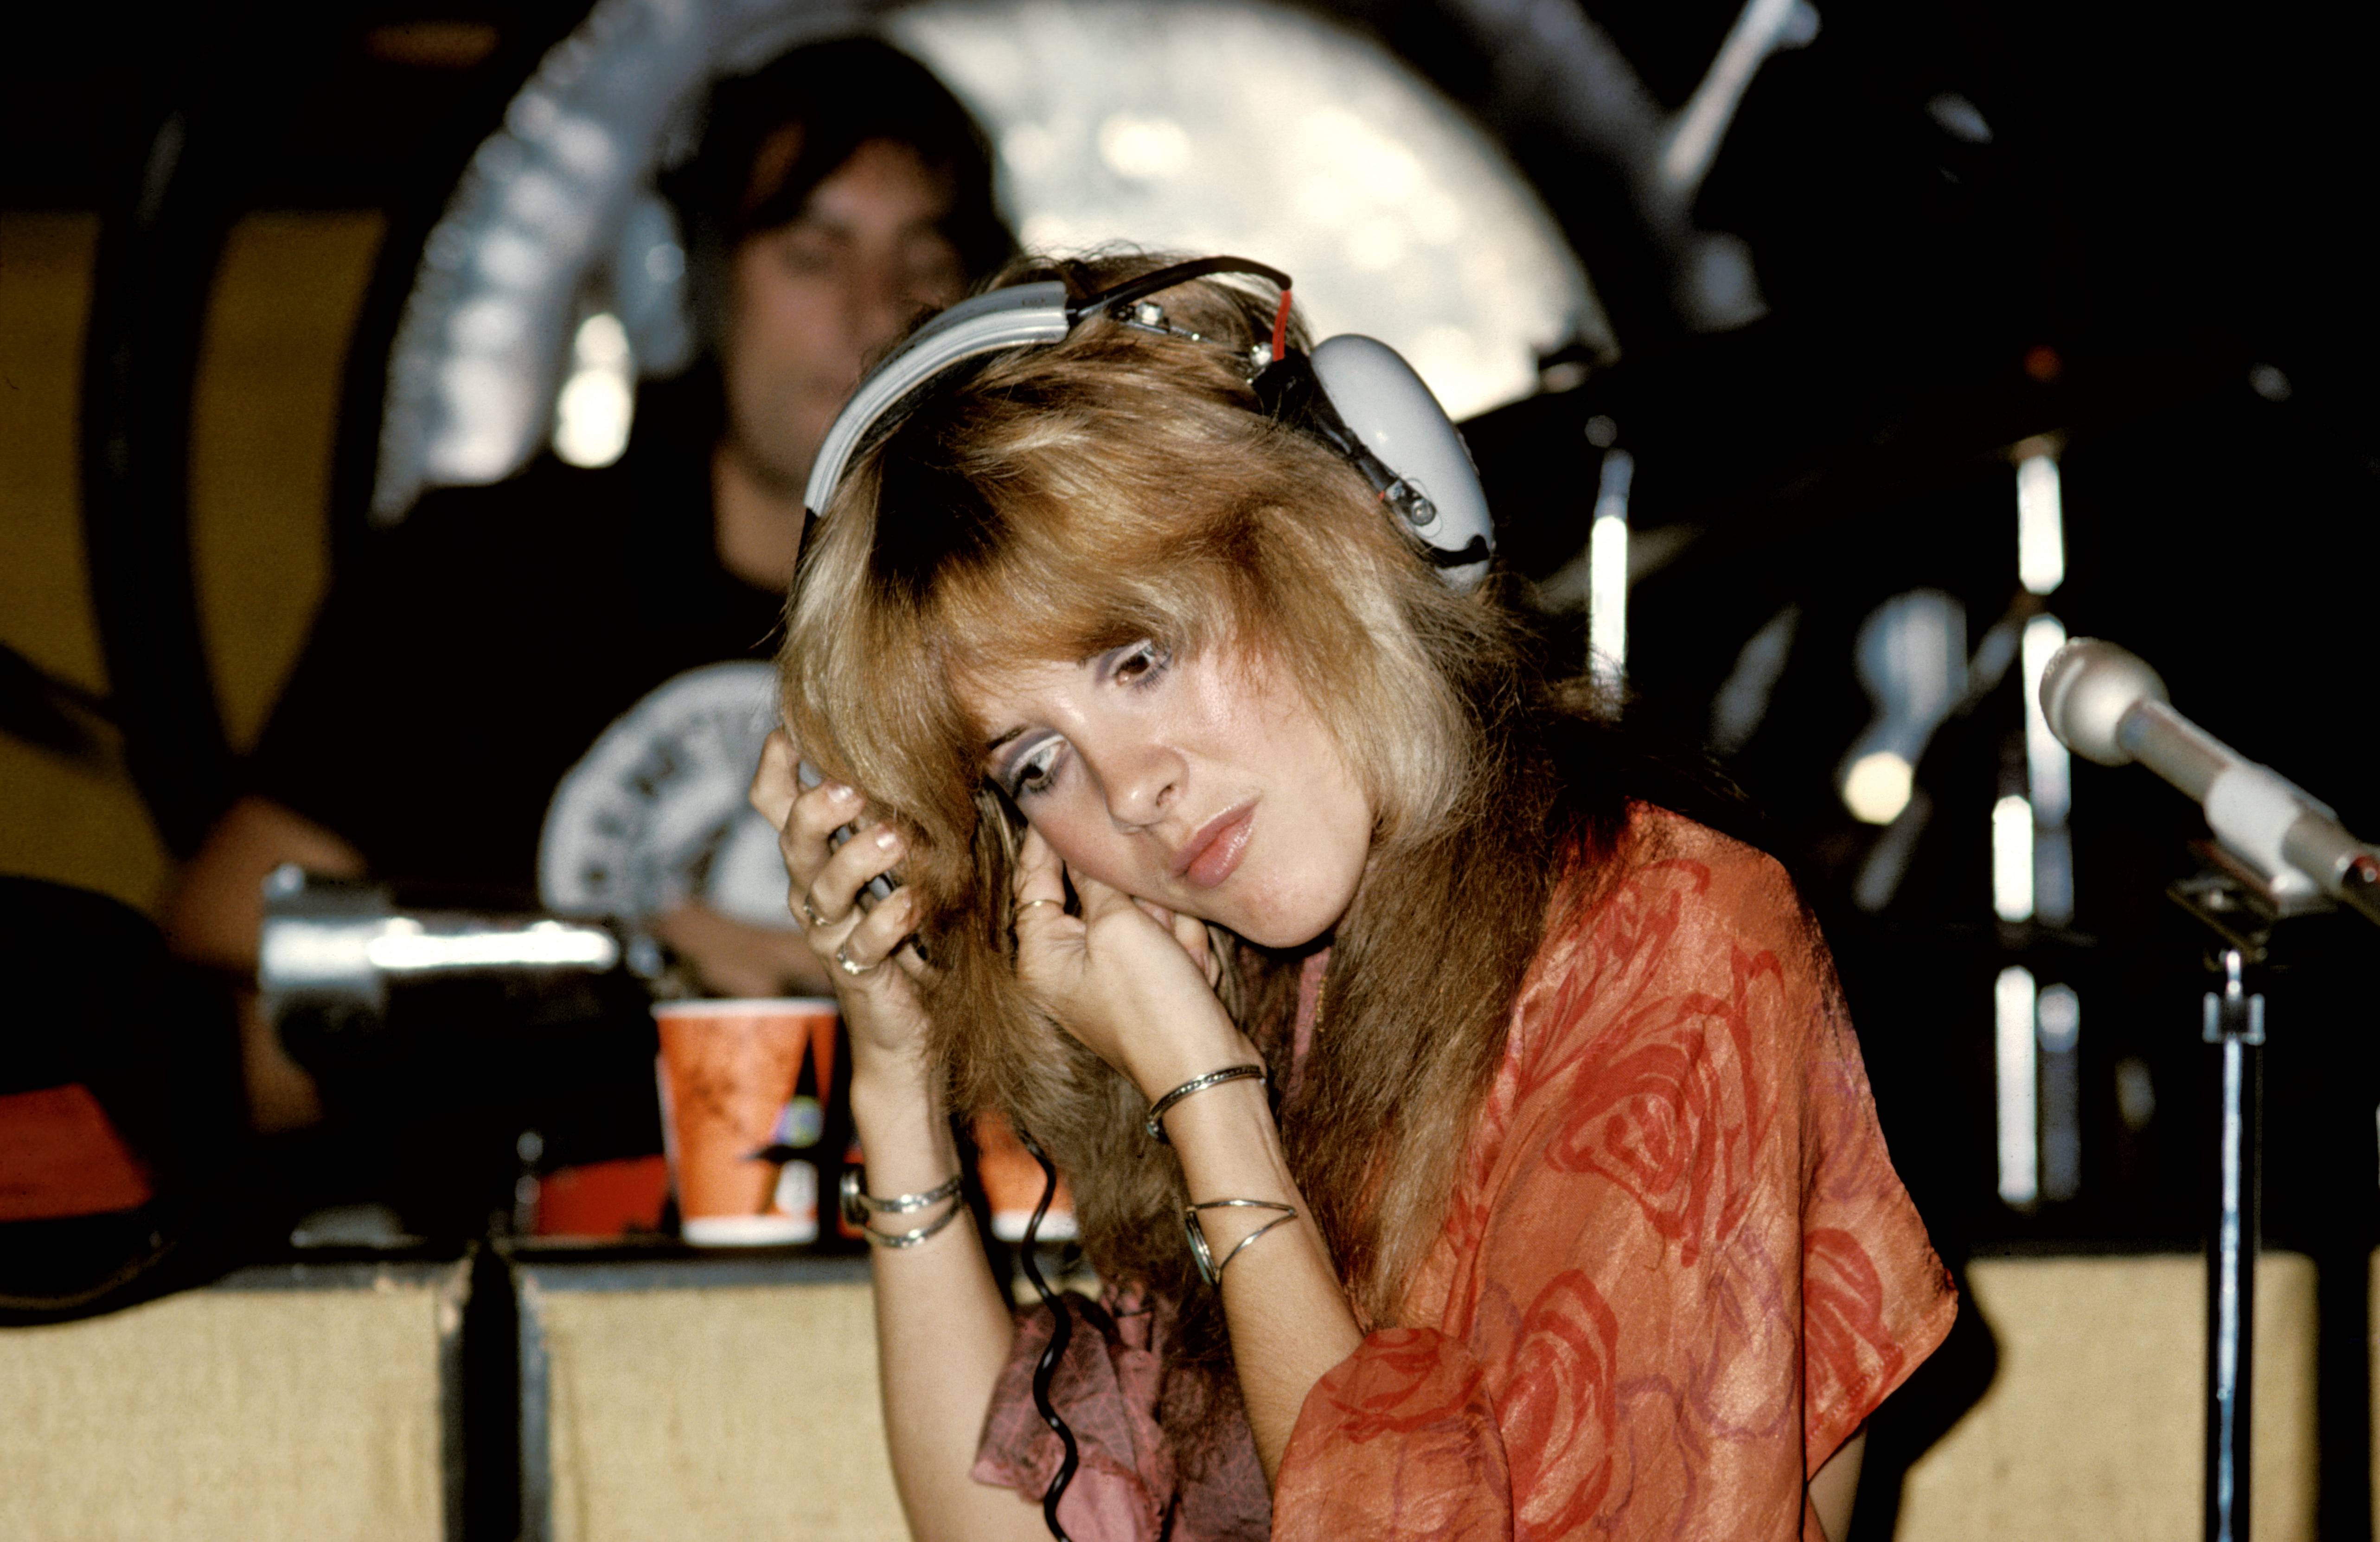 A young Stevie Nicks wears an orange floral shirt and gray headphones while recording with Fleetwood Mac.